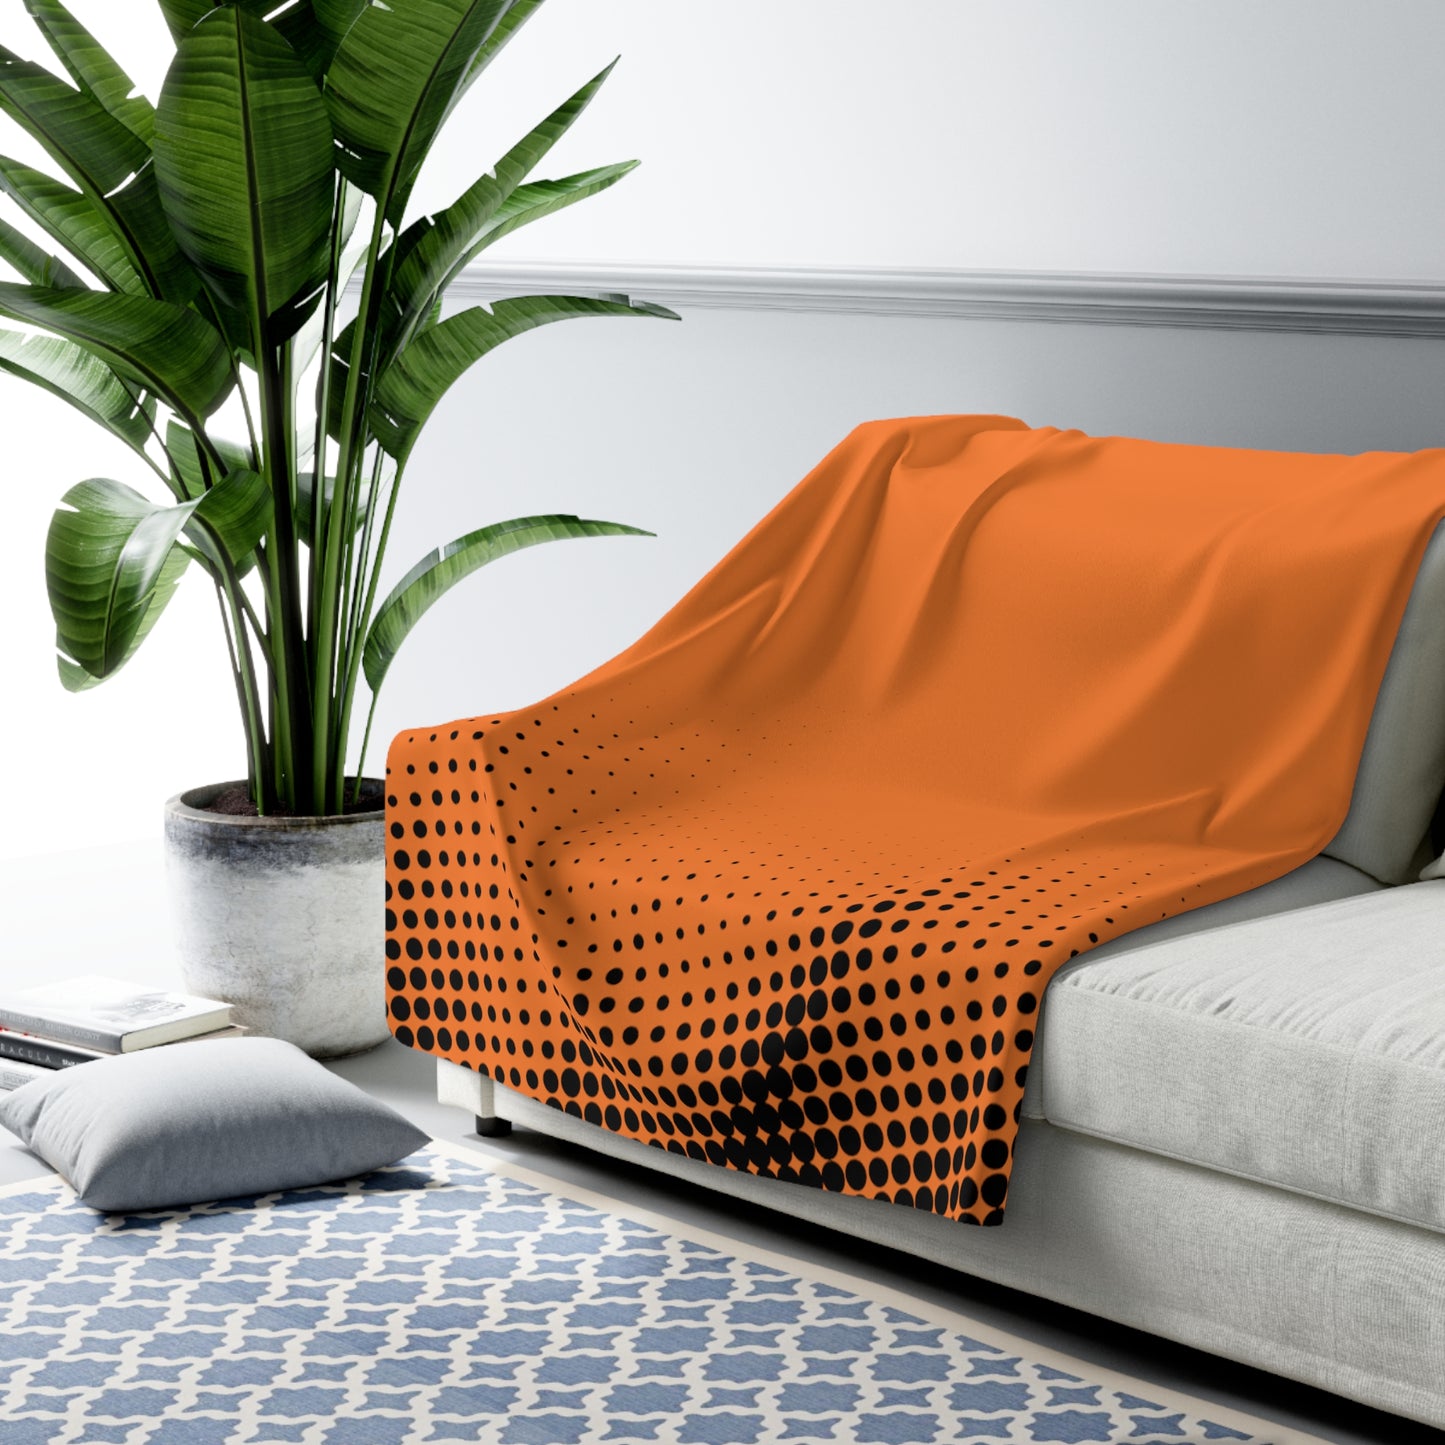 LUXURIOUS COZY BLANKET: THE EPITOME OF COMFORT AND WARMTH | Waves dots orange 